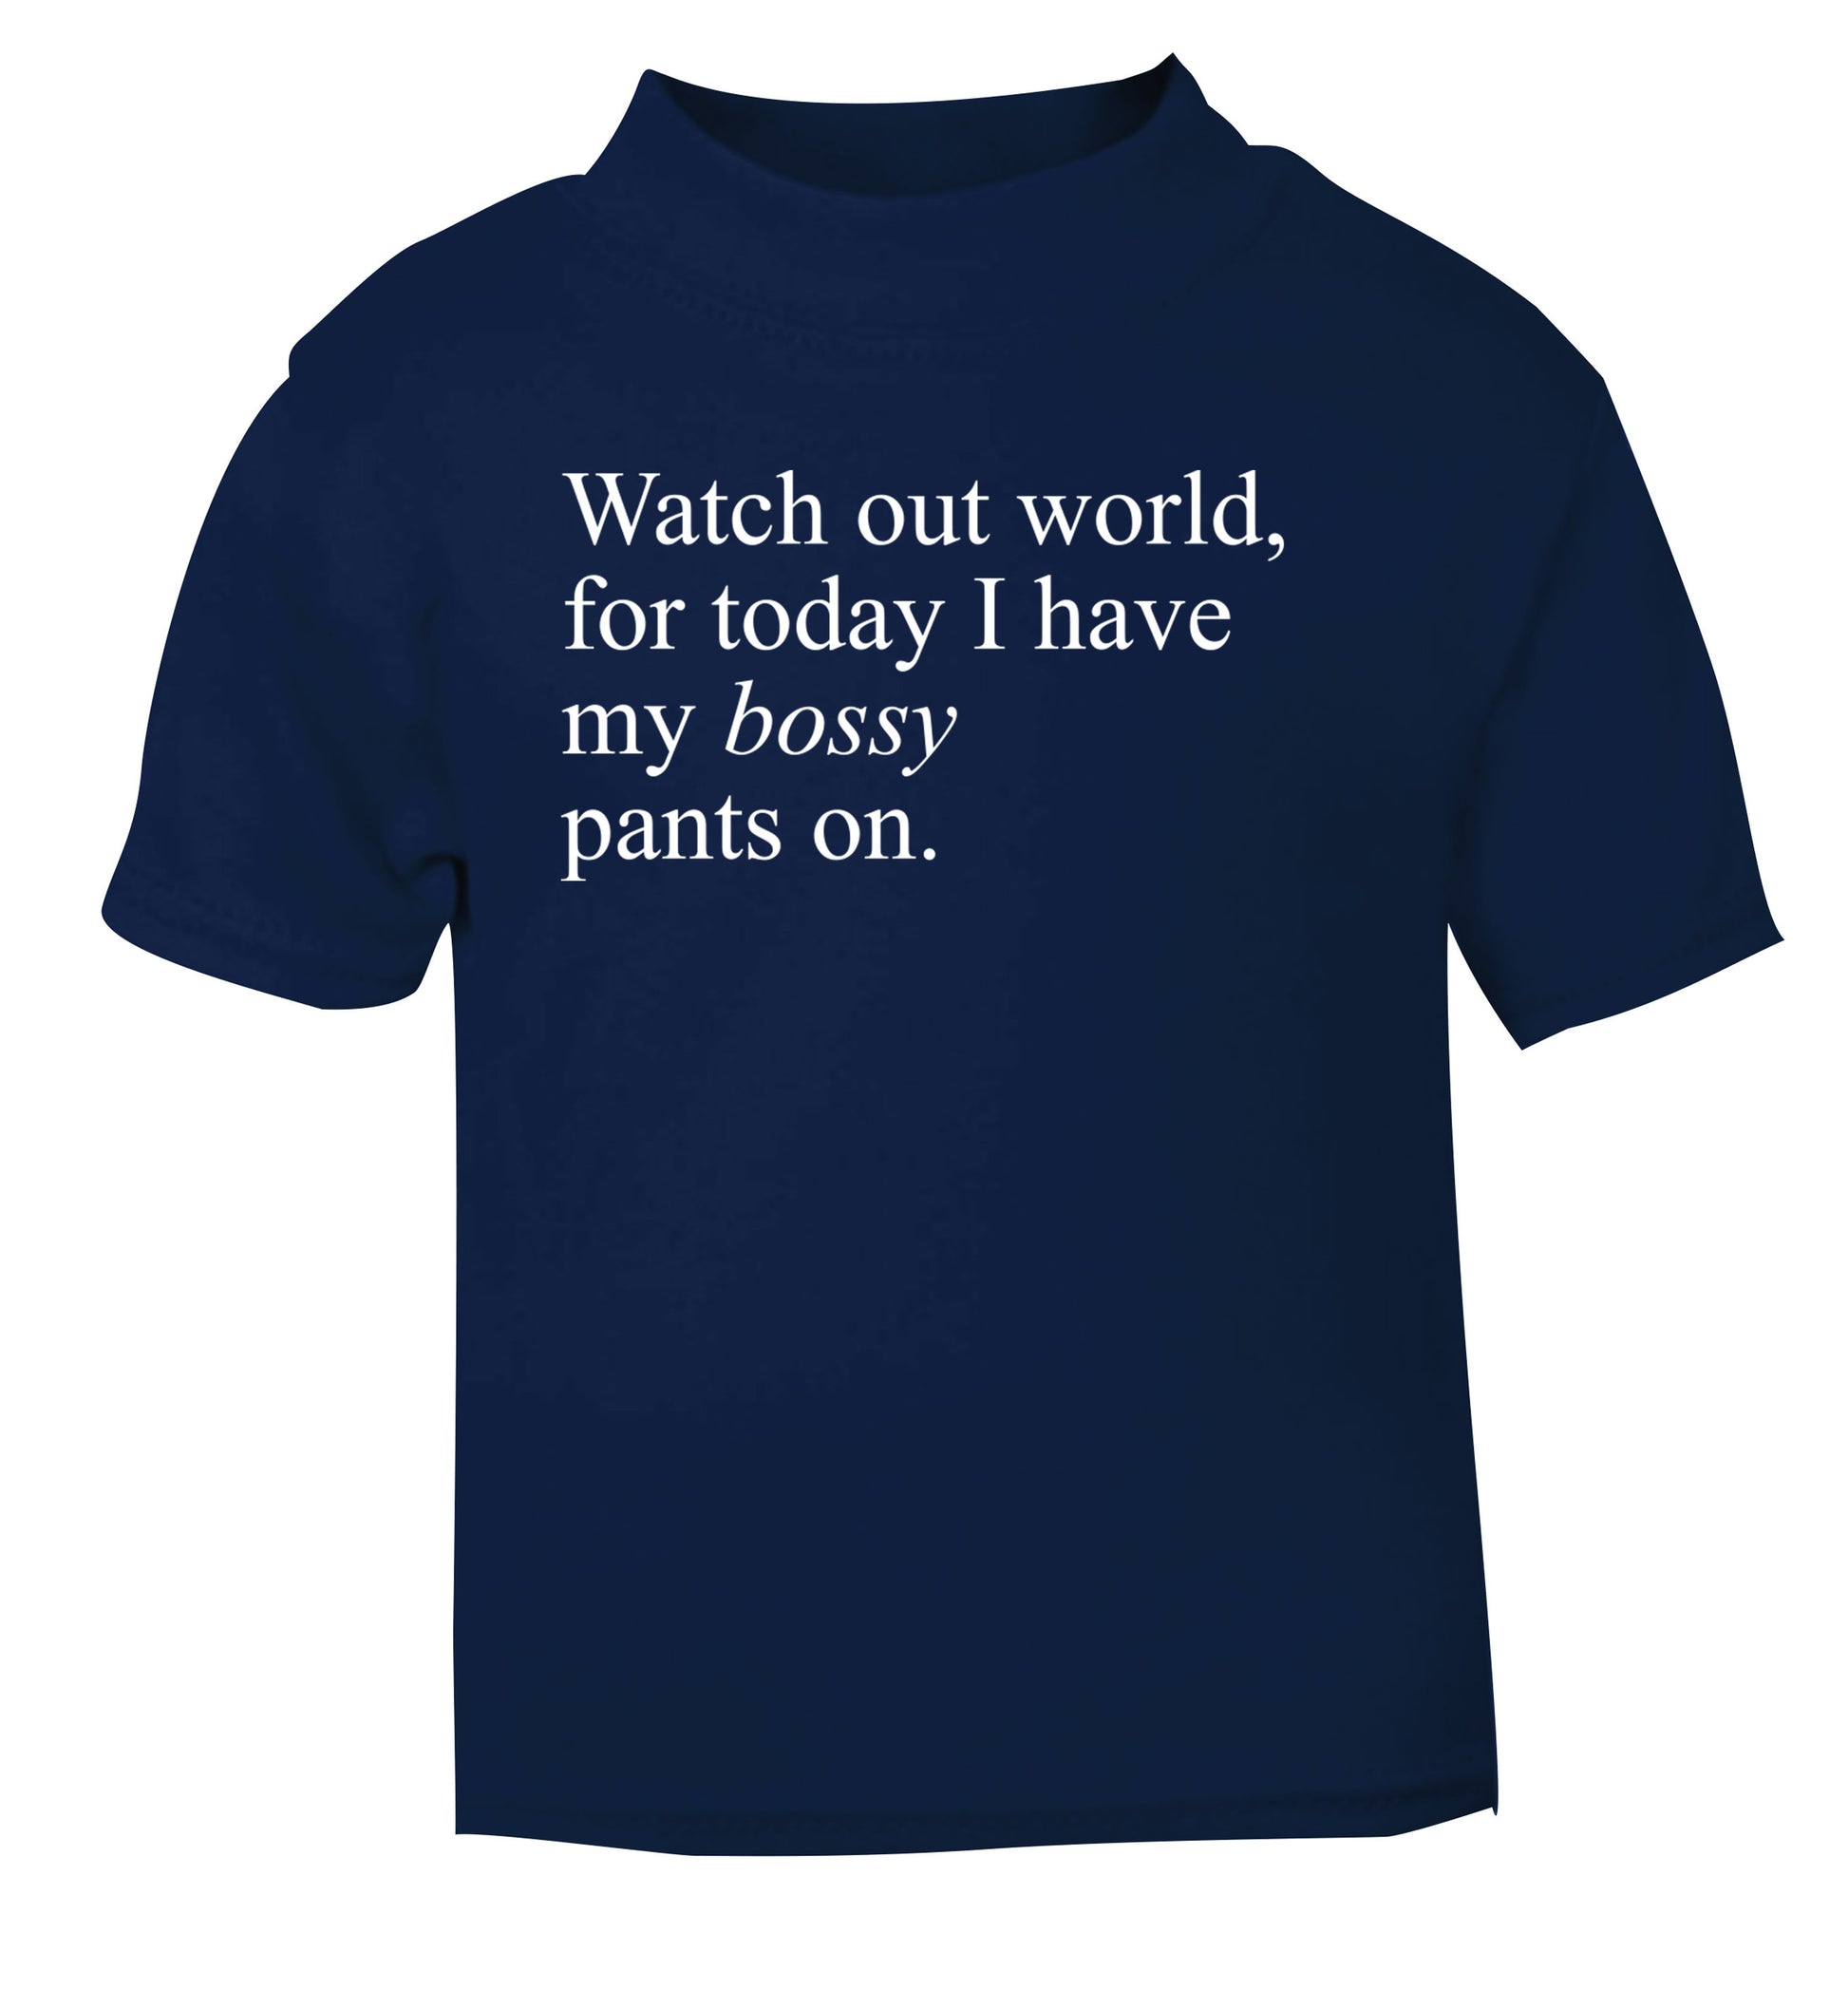 Watch out world, for today I have my bossy pants on navy Baby Toddler Tshirt 2 Years